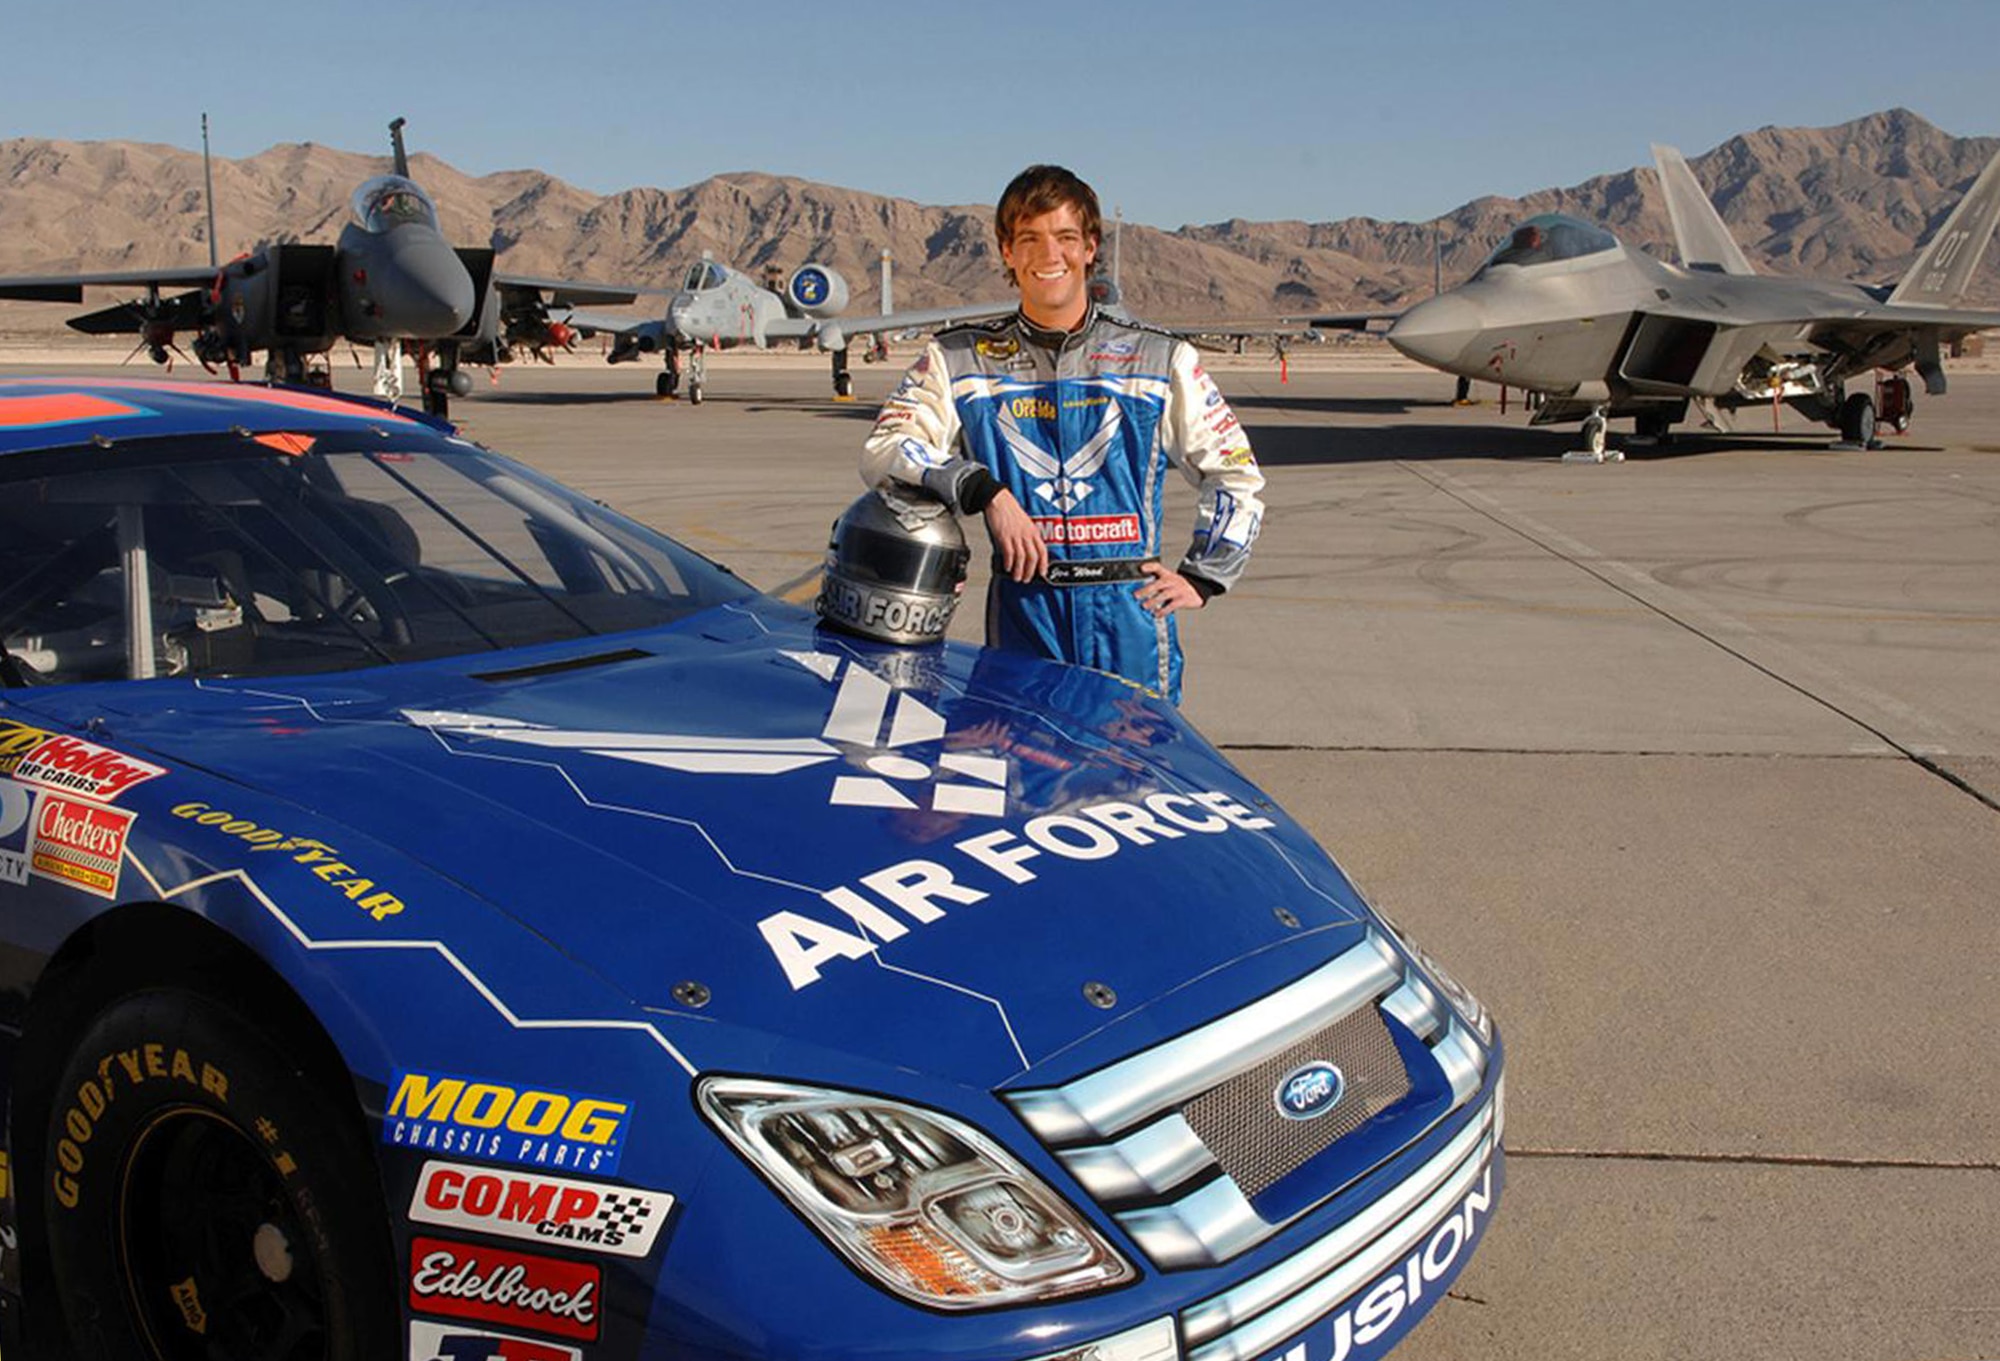 Driver Jon Wood made his professional Nextel Cup Series debut in the Air Force paint scheme Ford Fusion at Las Vegas early in the 2007 season.  Other drivers who also piloted the No. 21 car for the Air Force throughout the season were Kenny Schraeder, and Bill Elliott. (Photo/Master Sgt. Scott F. Reed)